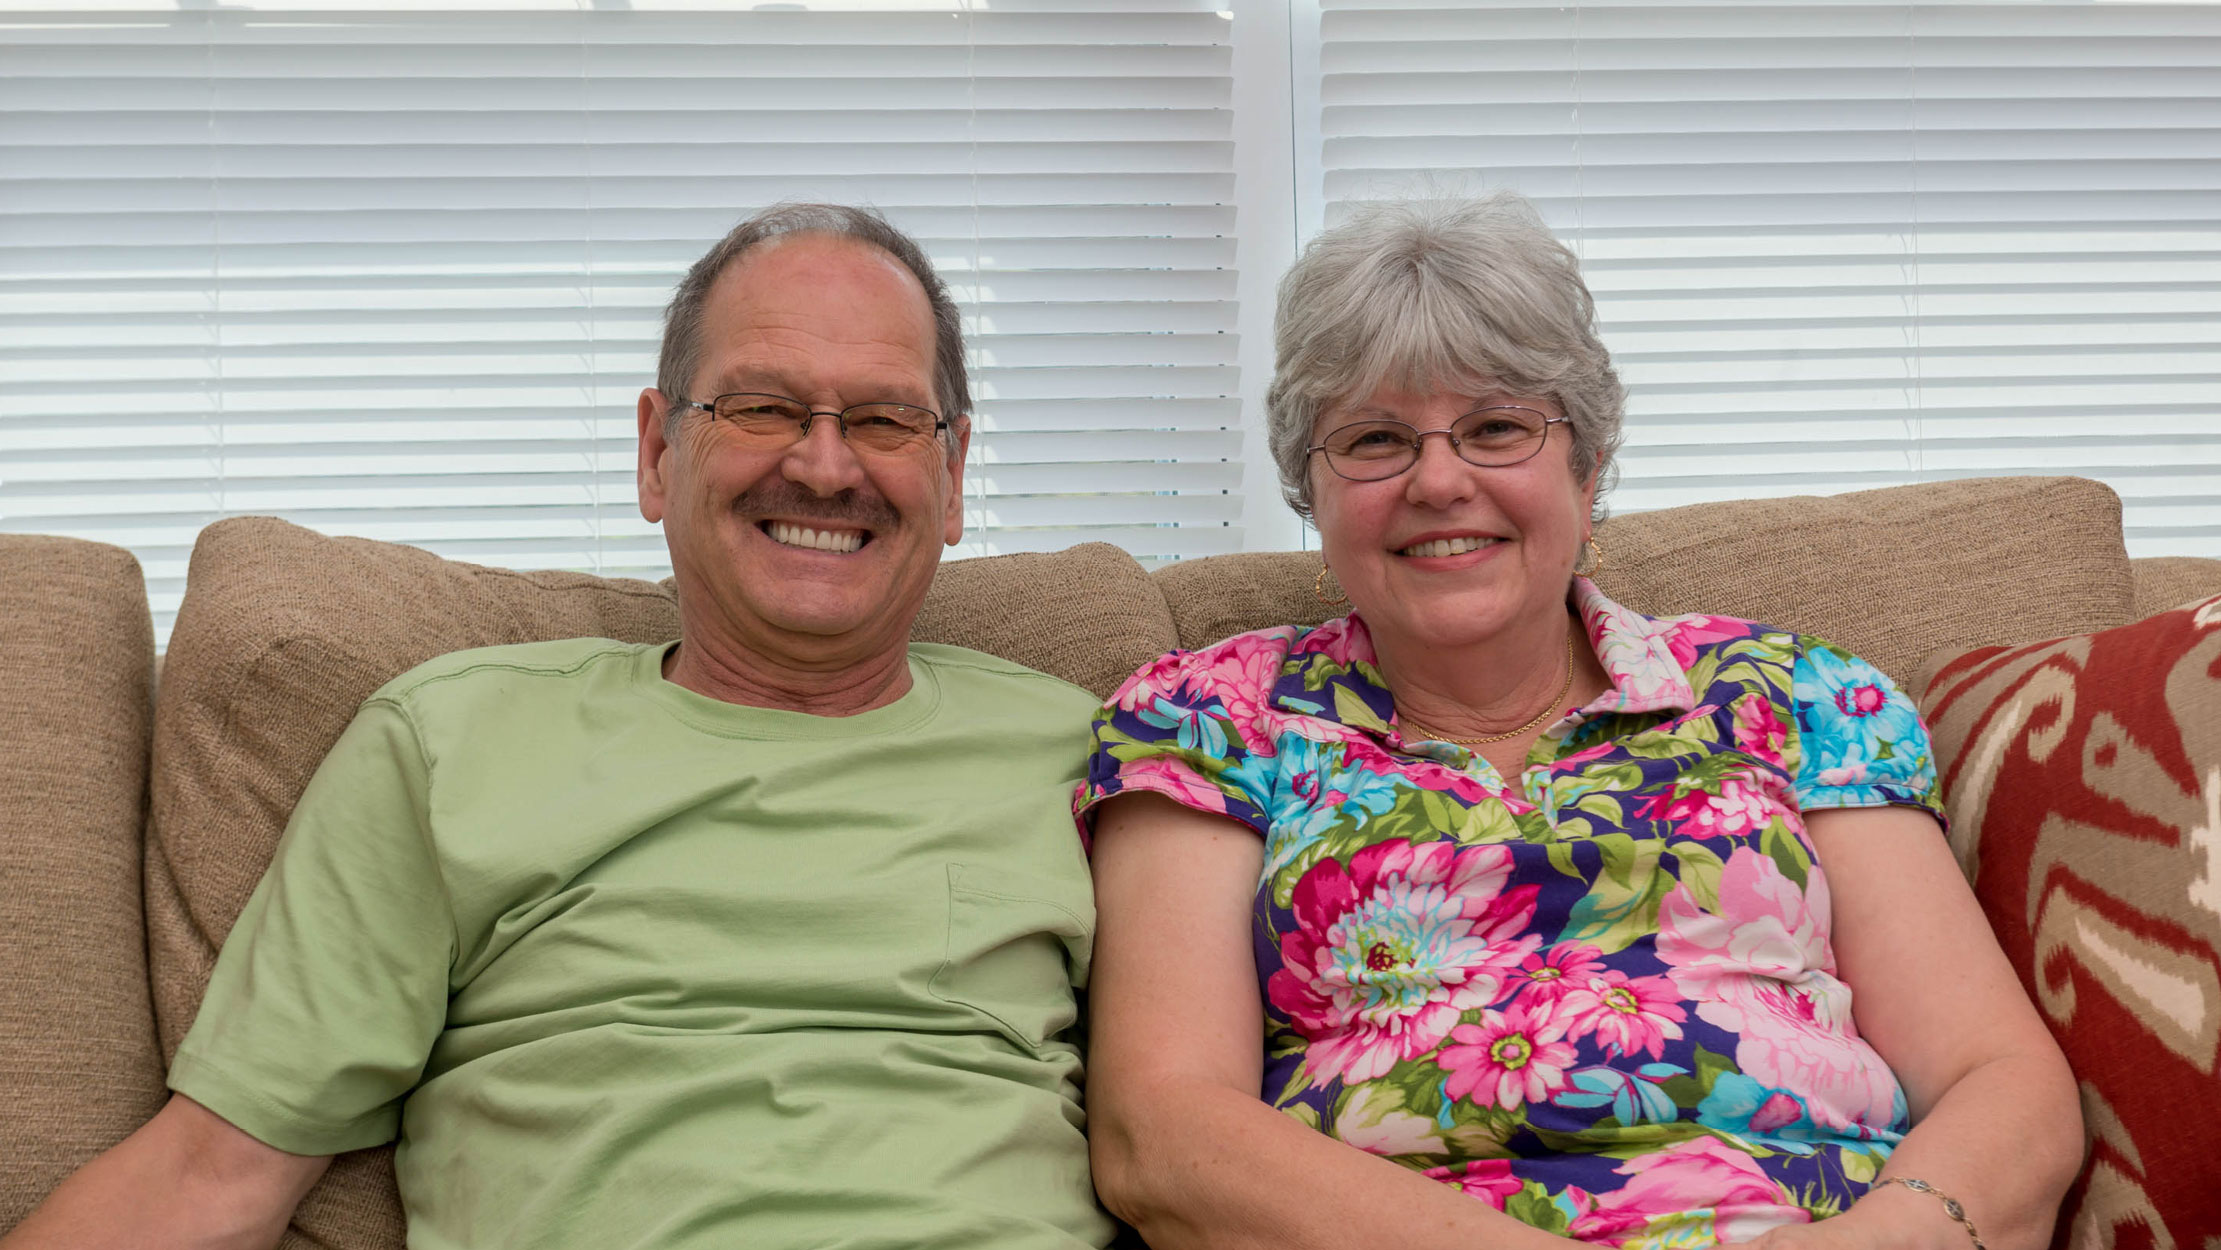 Edward and Debra Dille relax together in the Sawmill Landing community room.